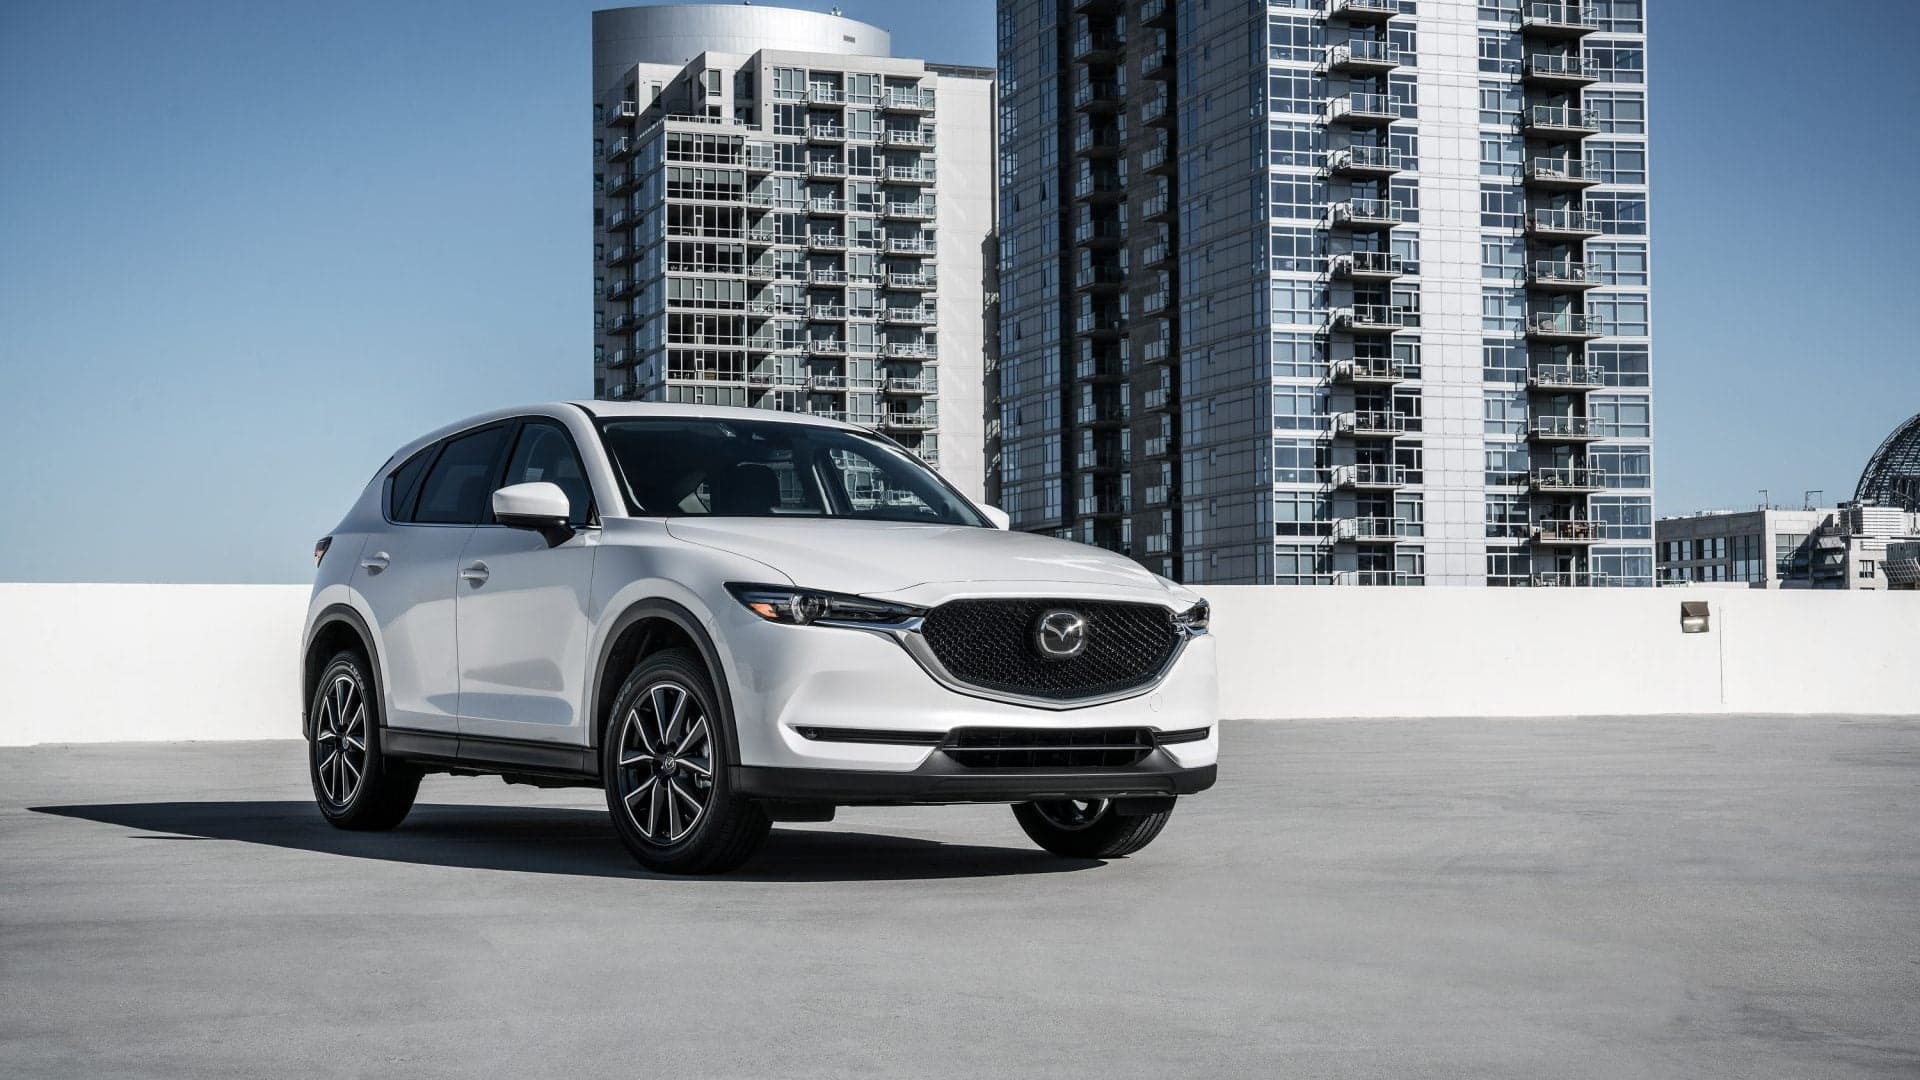 The New Diesel Mazda CX-5 Is Only Slightly More Efficient Than the Gas Version